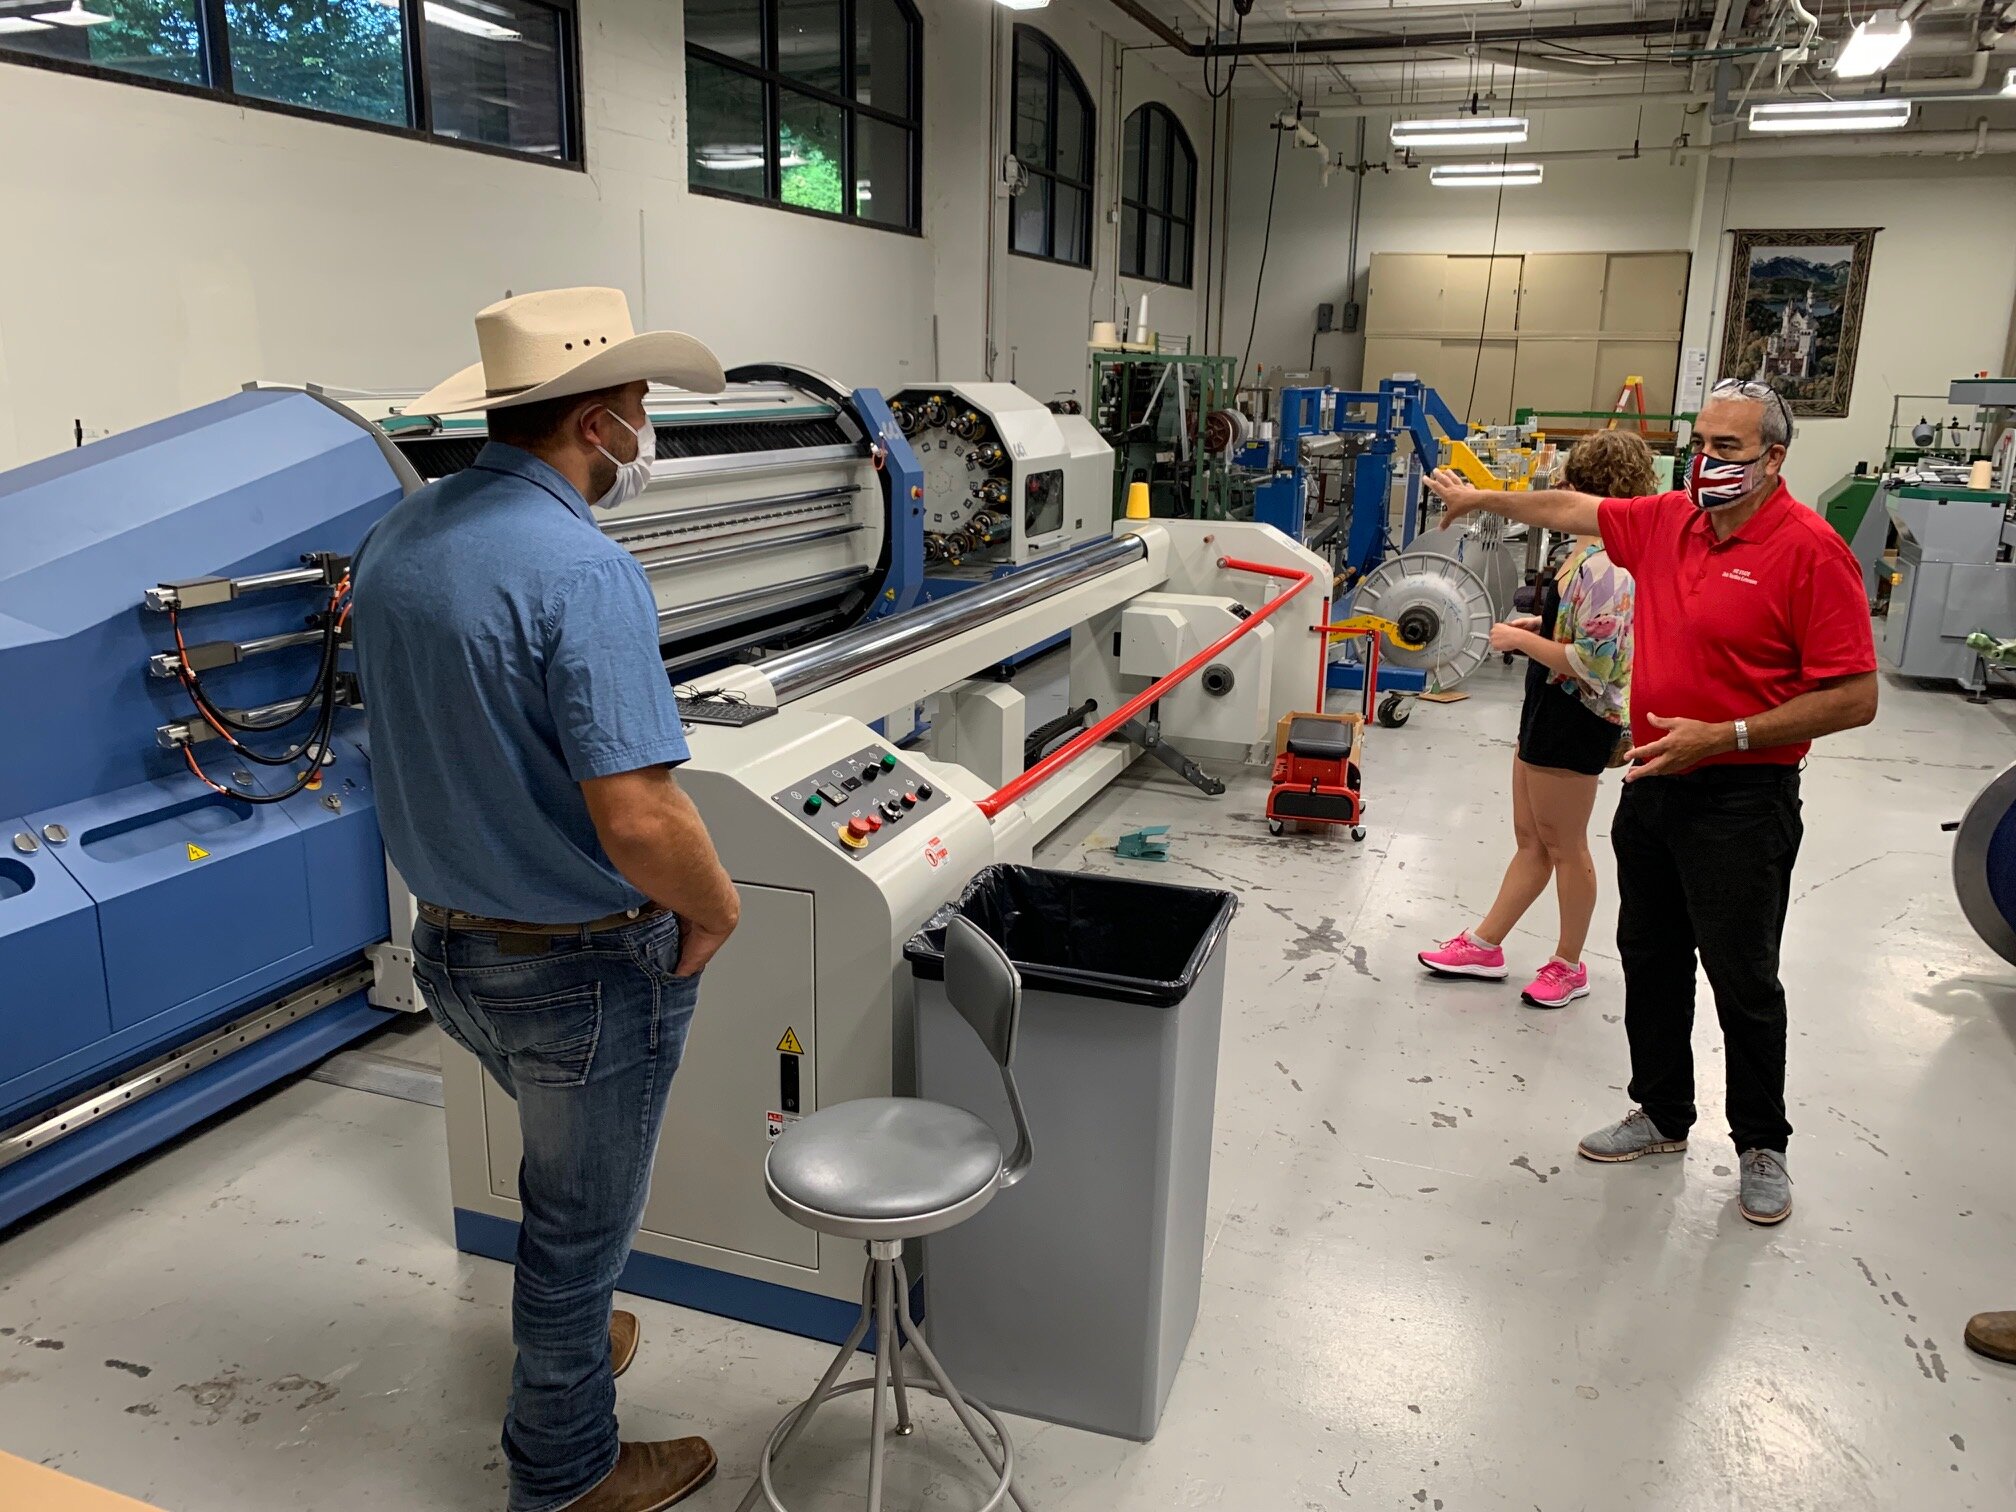 Montana Department of Agriculture marketing representative Weston Merrill listens as Dr. Andre West, director of the Zeiss Textiles Extension Center explains the equipment and process for spinning cotton and how hemp must look and perform to work in these processes.